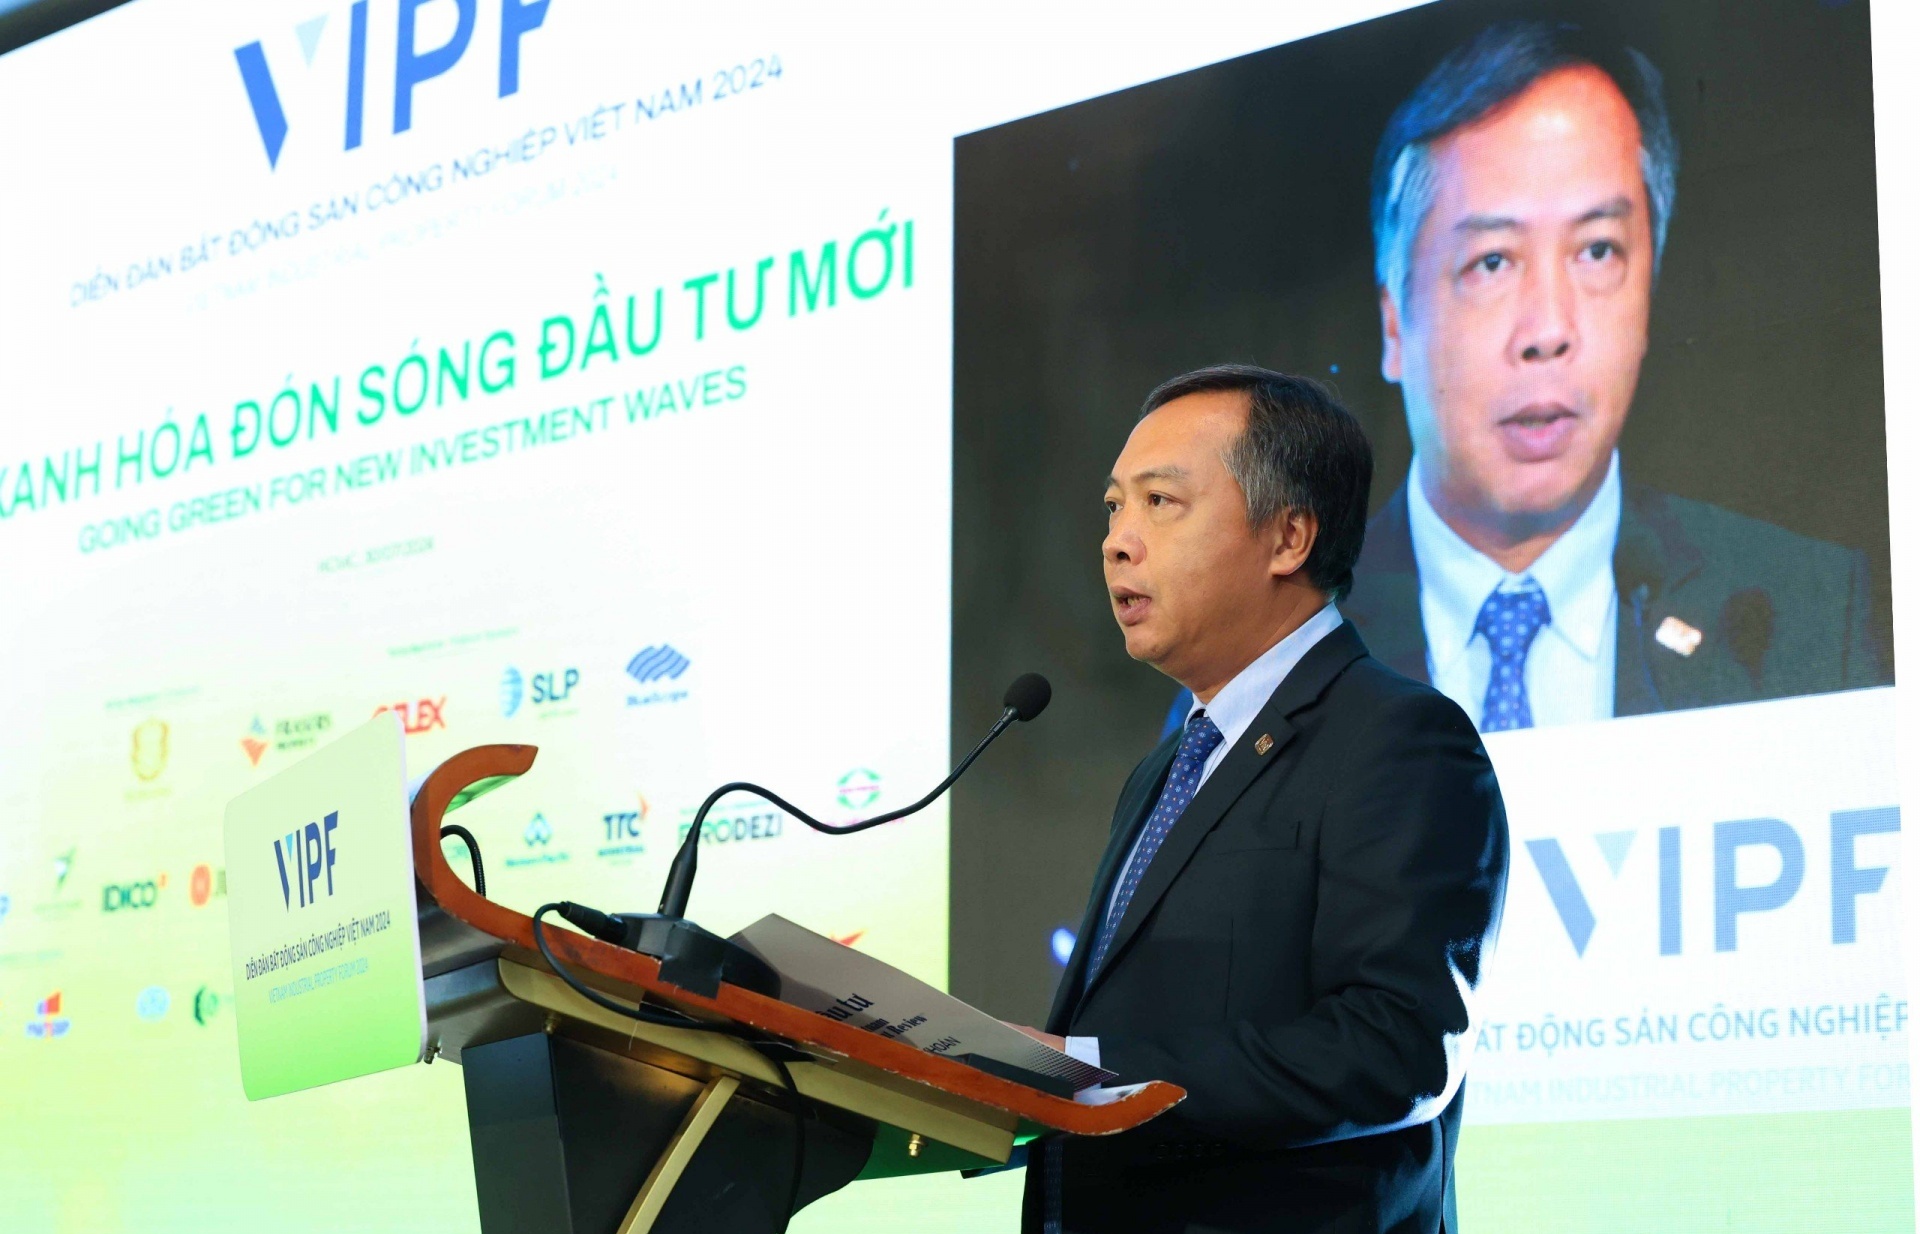 vipf 2024 going green for new investment waves